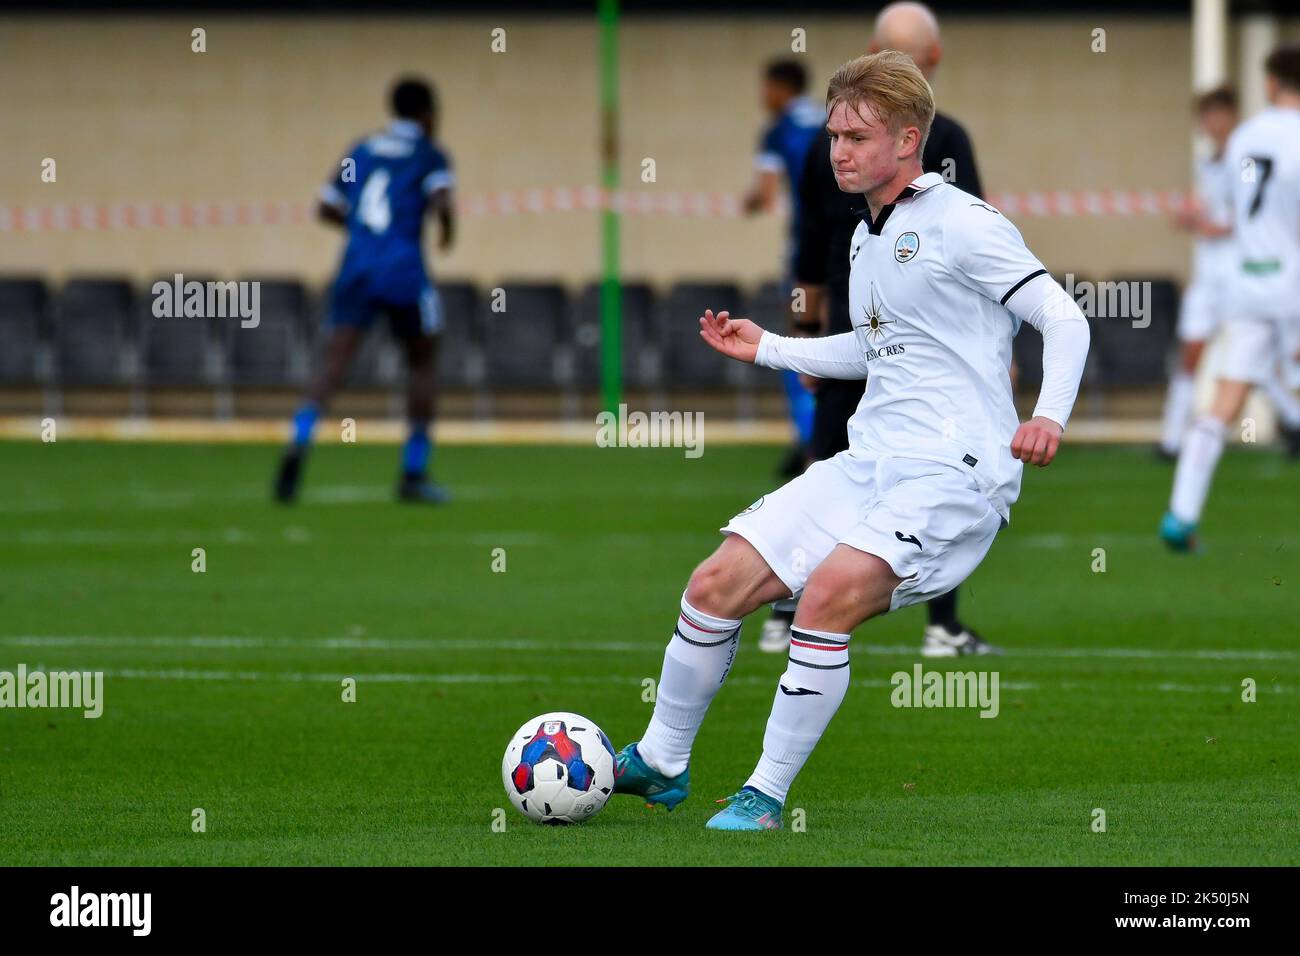 Swansea, Wales. 1 October 2022. Daniel Watts of Swansea City in action during the Professional Development League game between Swansea City Under 18 and Charlton Athletic Under 18 at the Swansea City Academy in Swansea, Wales, UK on 1 October 2022. Credit: Duncan Thomas/Majestic Media. Stock Photo